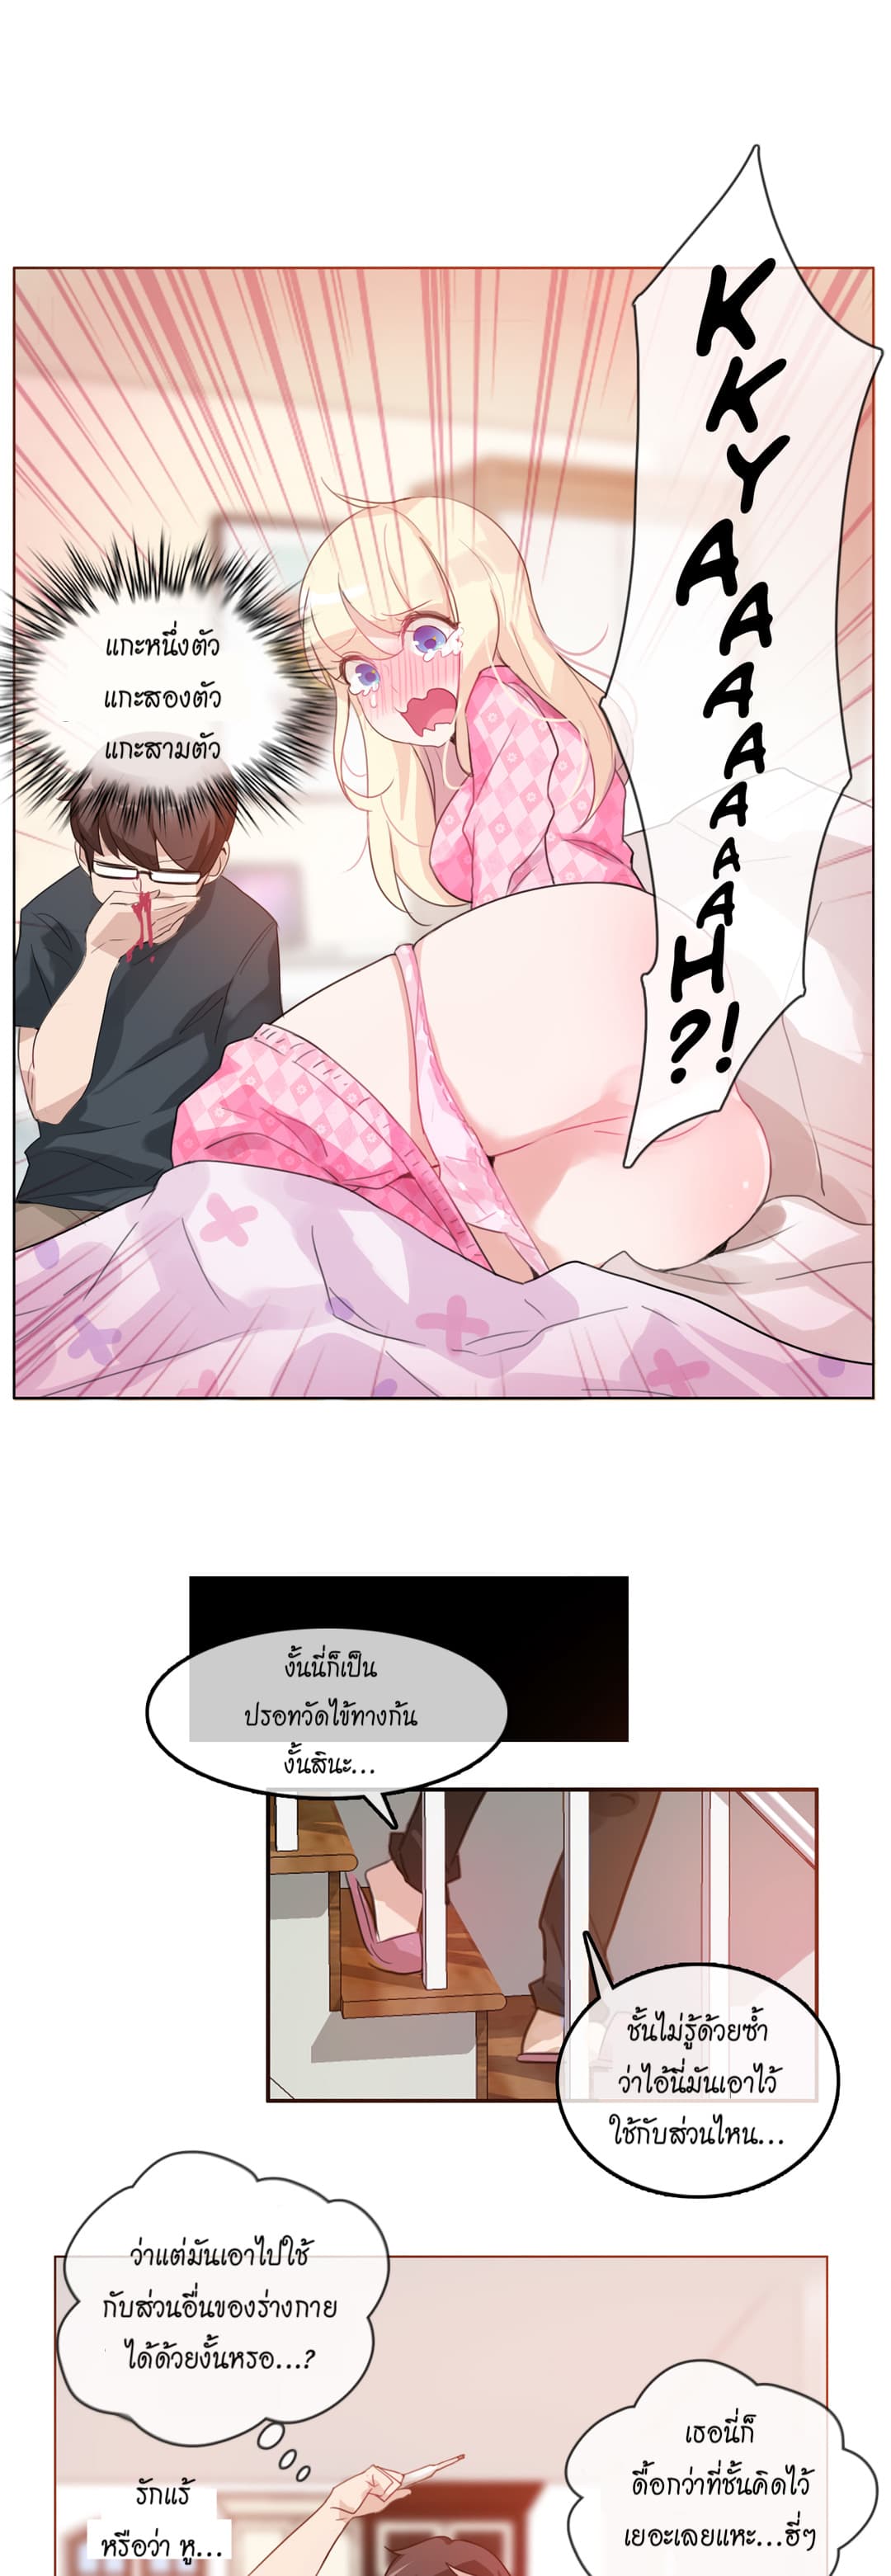 A Pervert’s Daily Life 15 (19)